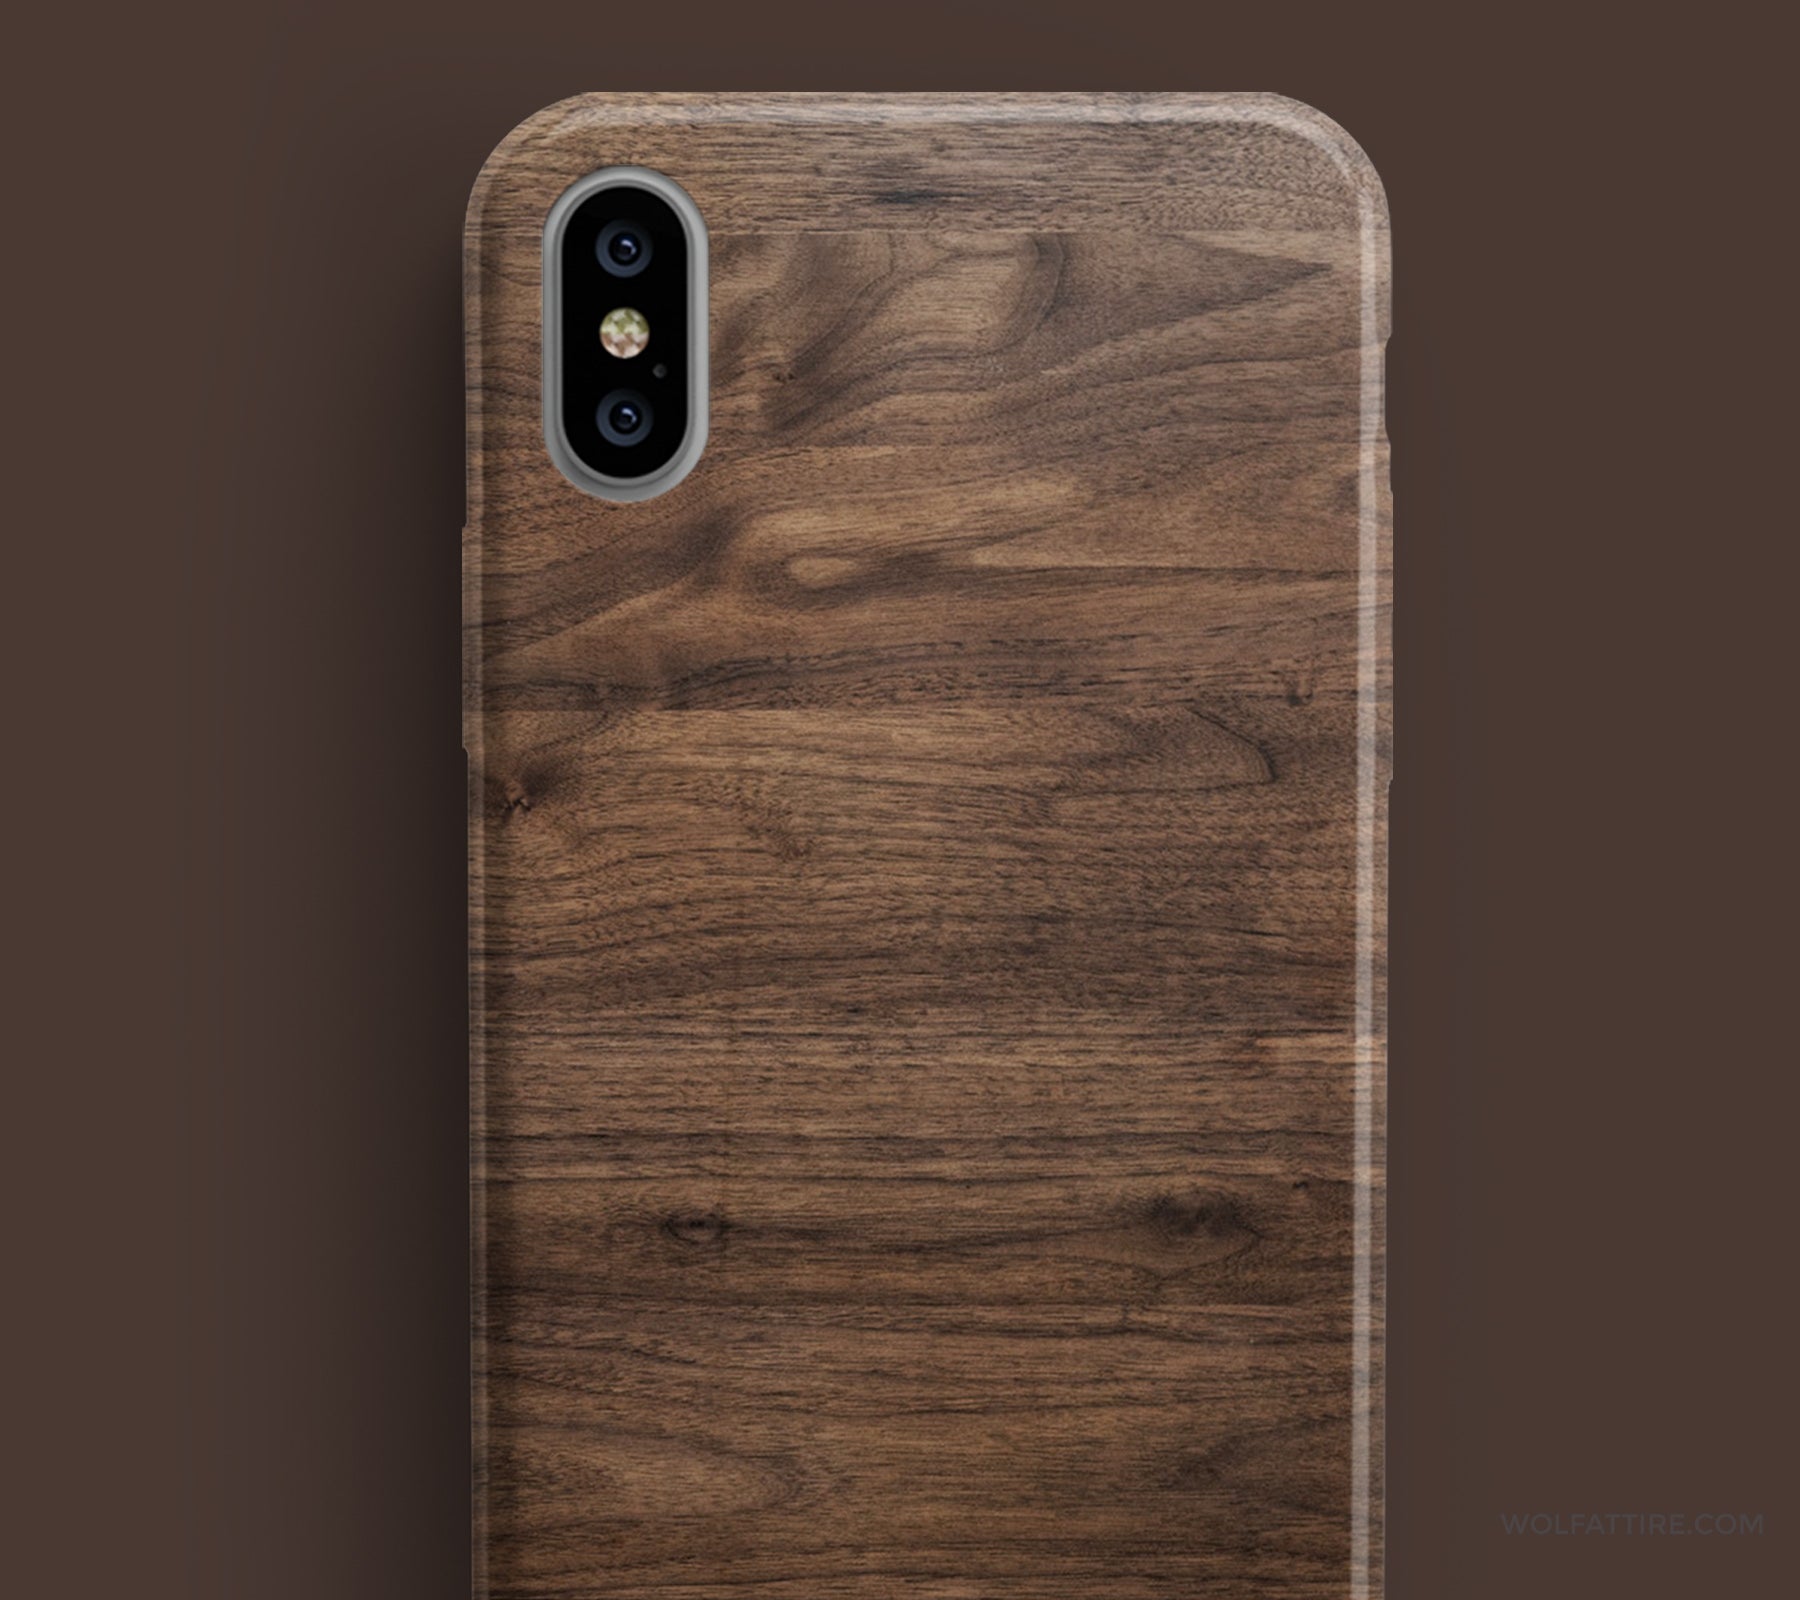 Walnut texture iphone x covers and cases online india - wolfattire